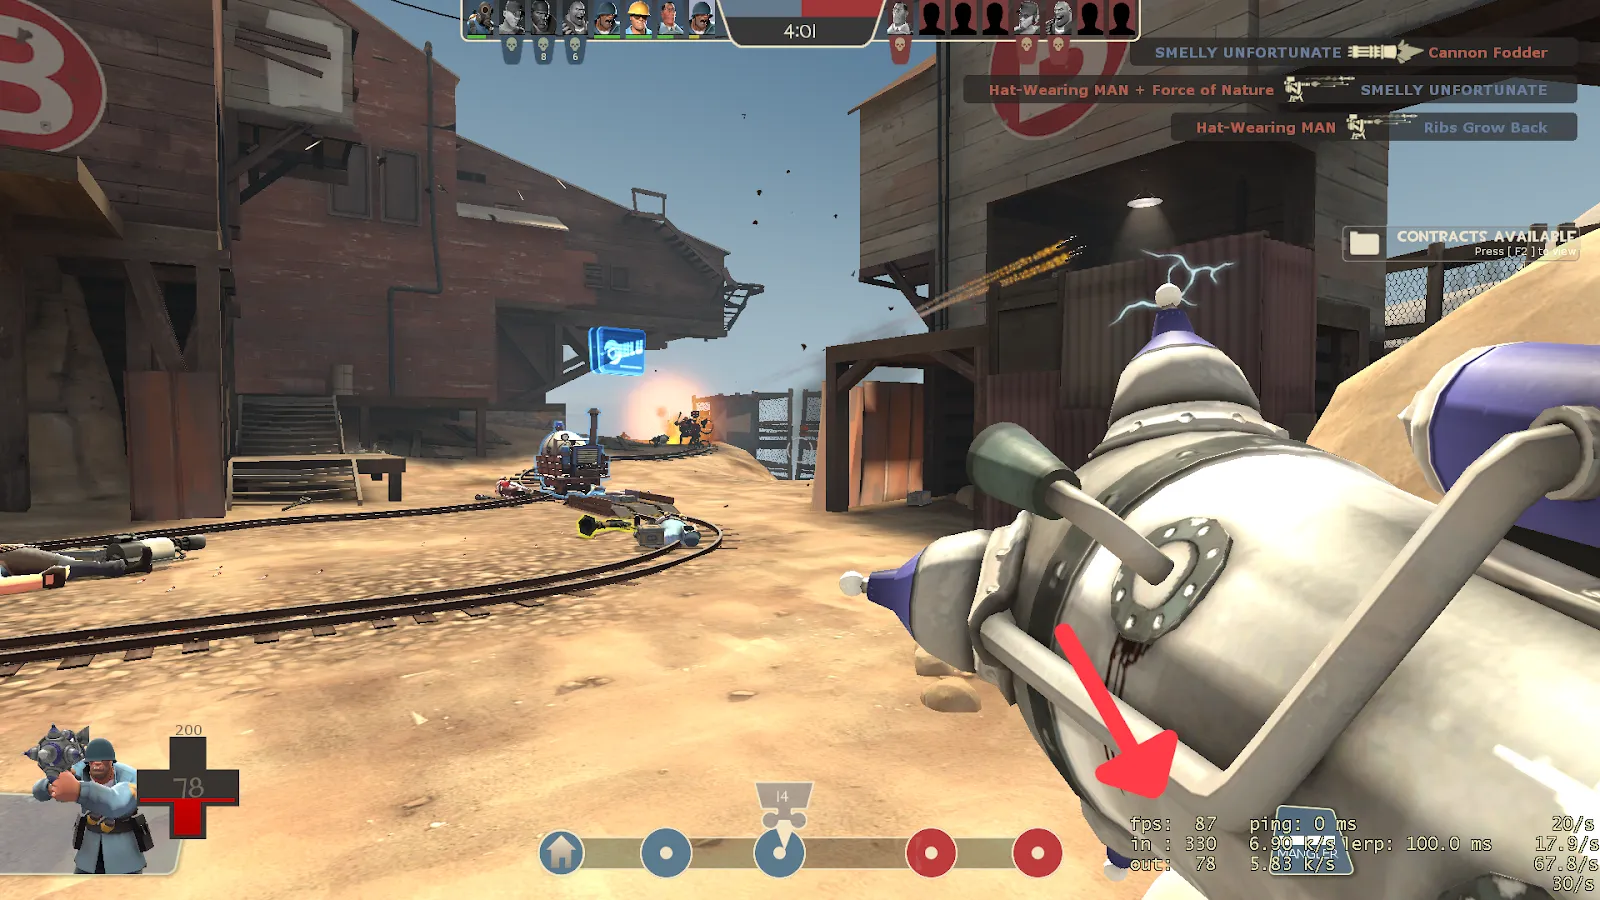 Command Console show FPS in Team Fortress 2 demonstration image